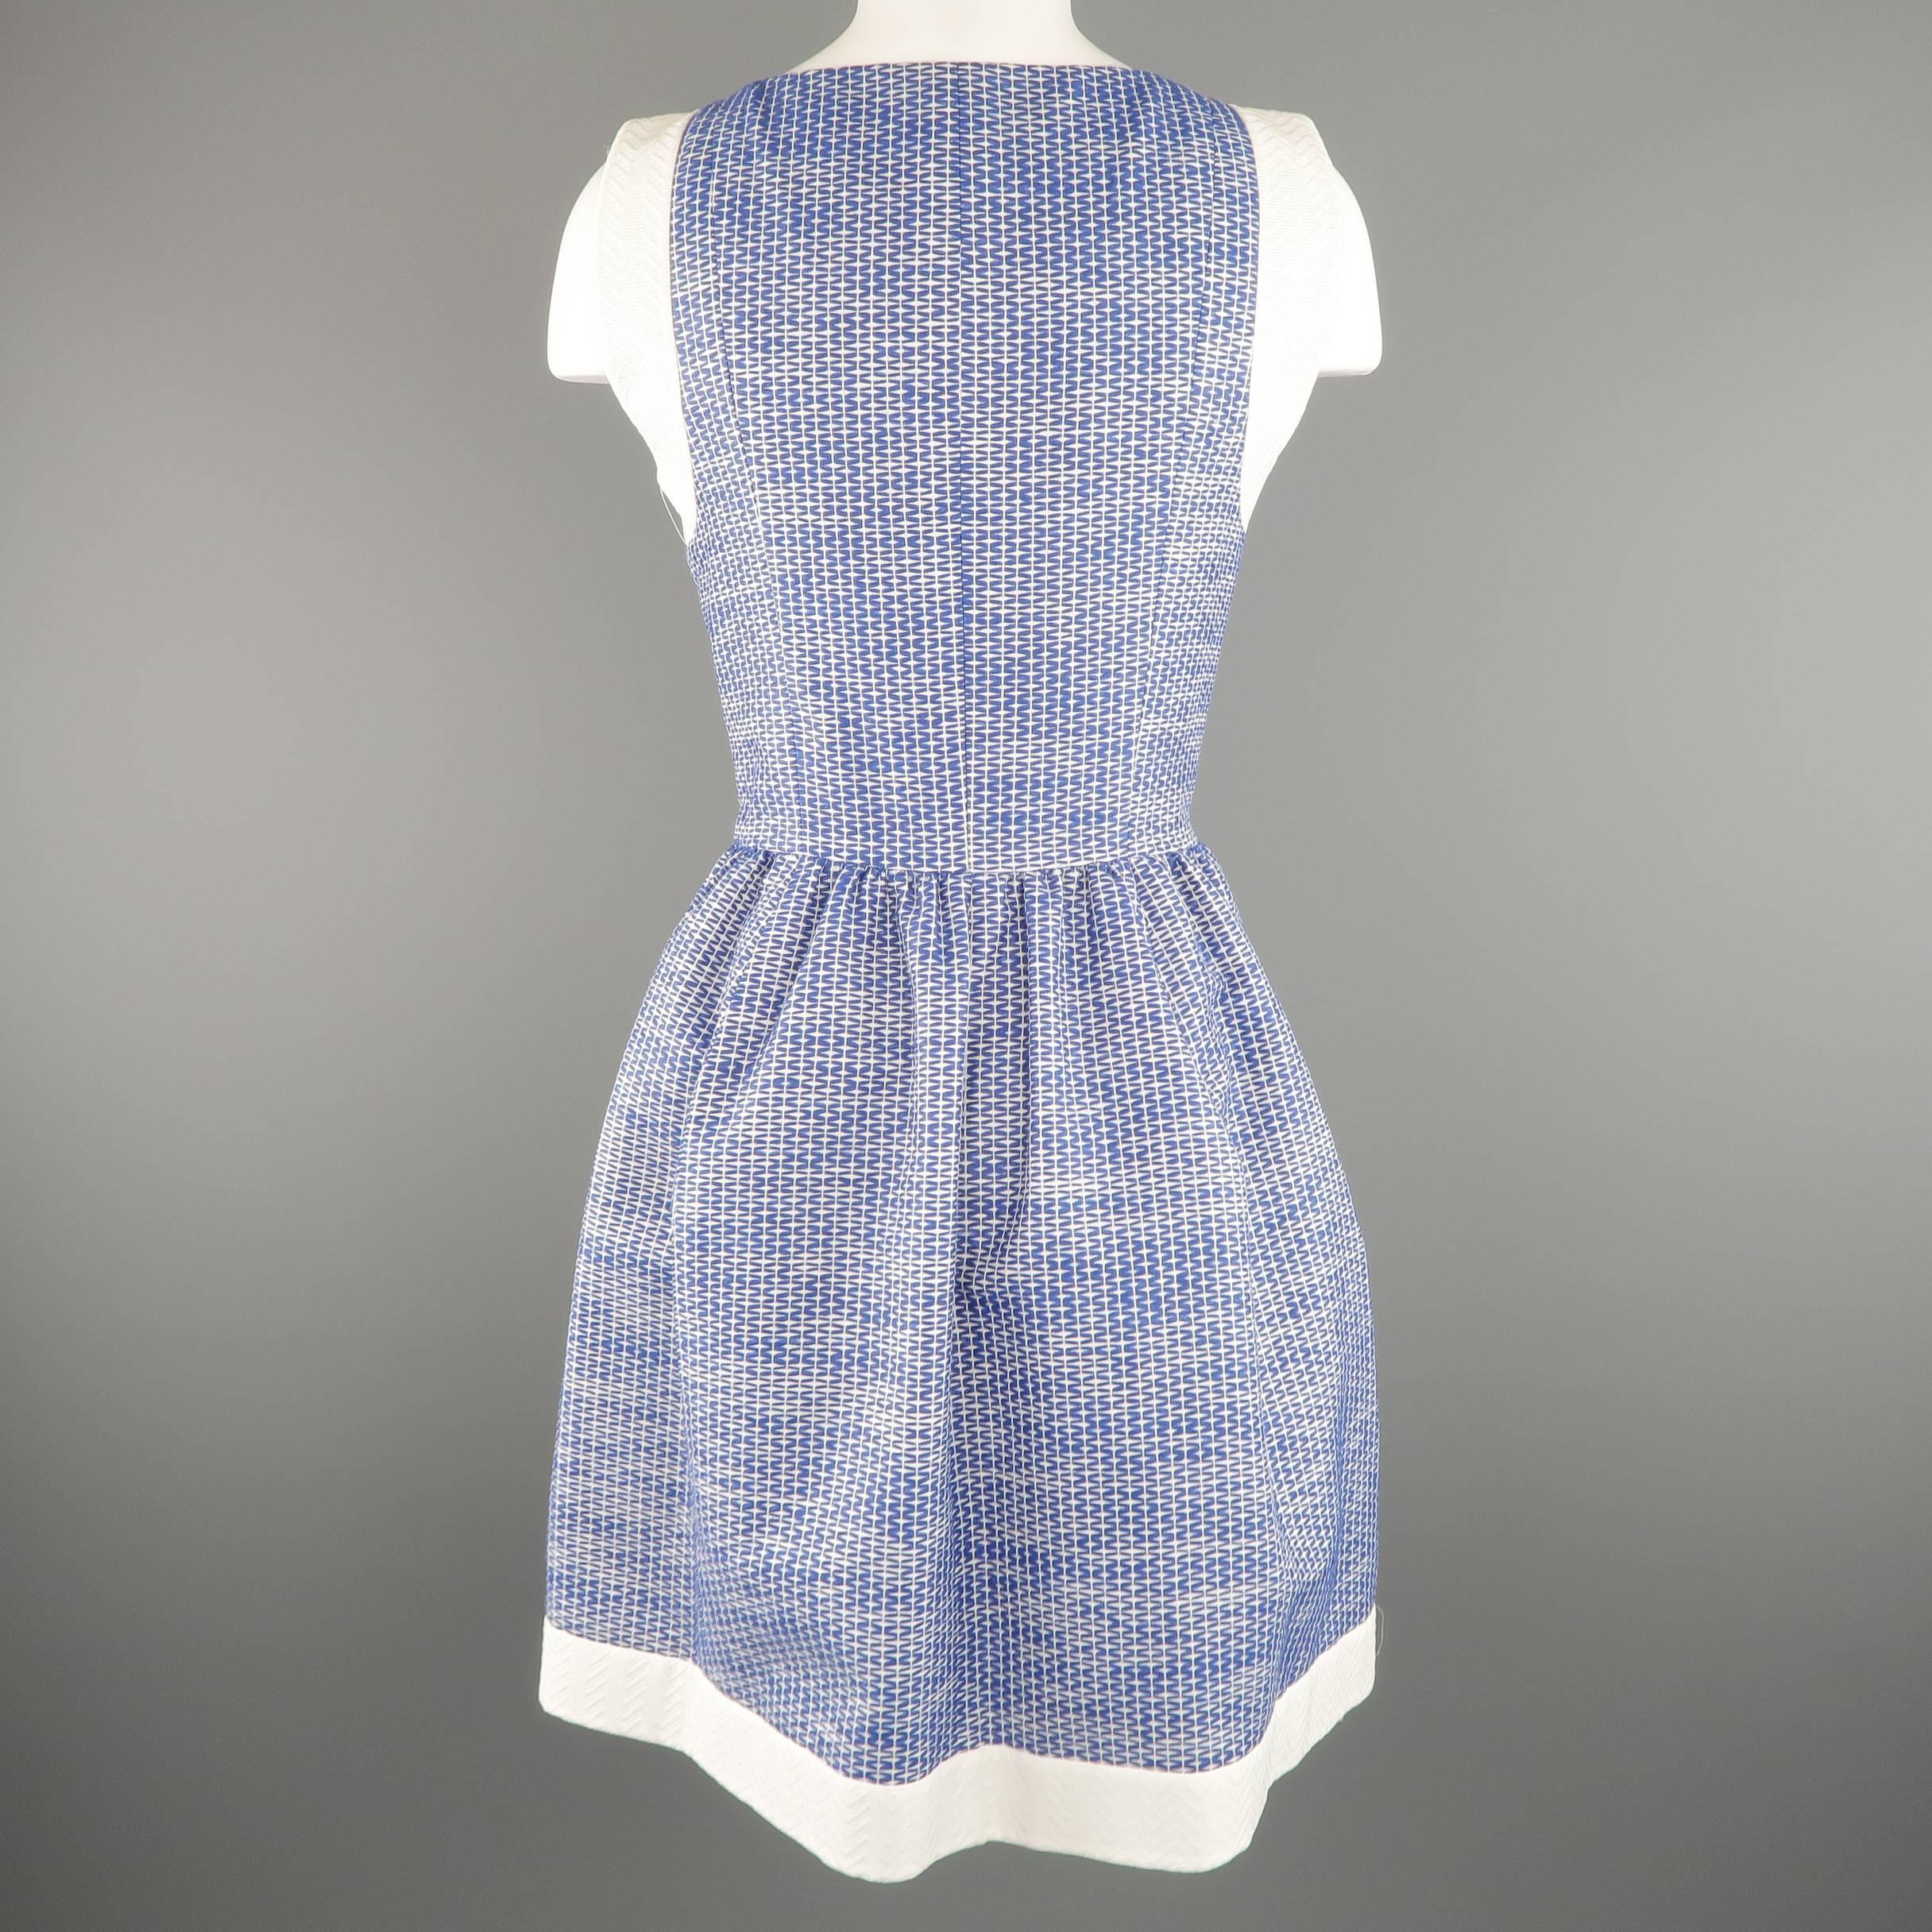 Chanel Dress Blue and White Zip Dress Size 4 US - 36 FR 3